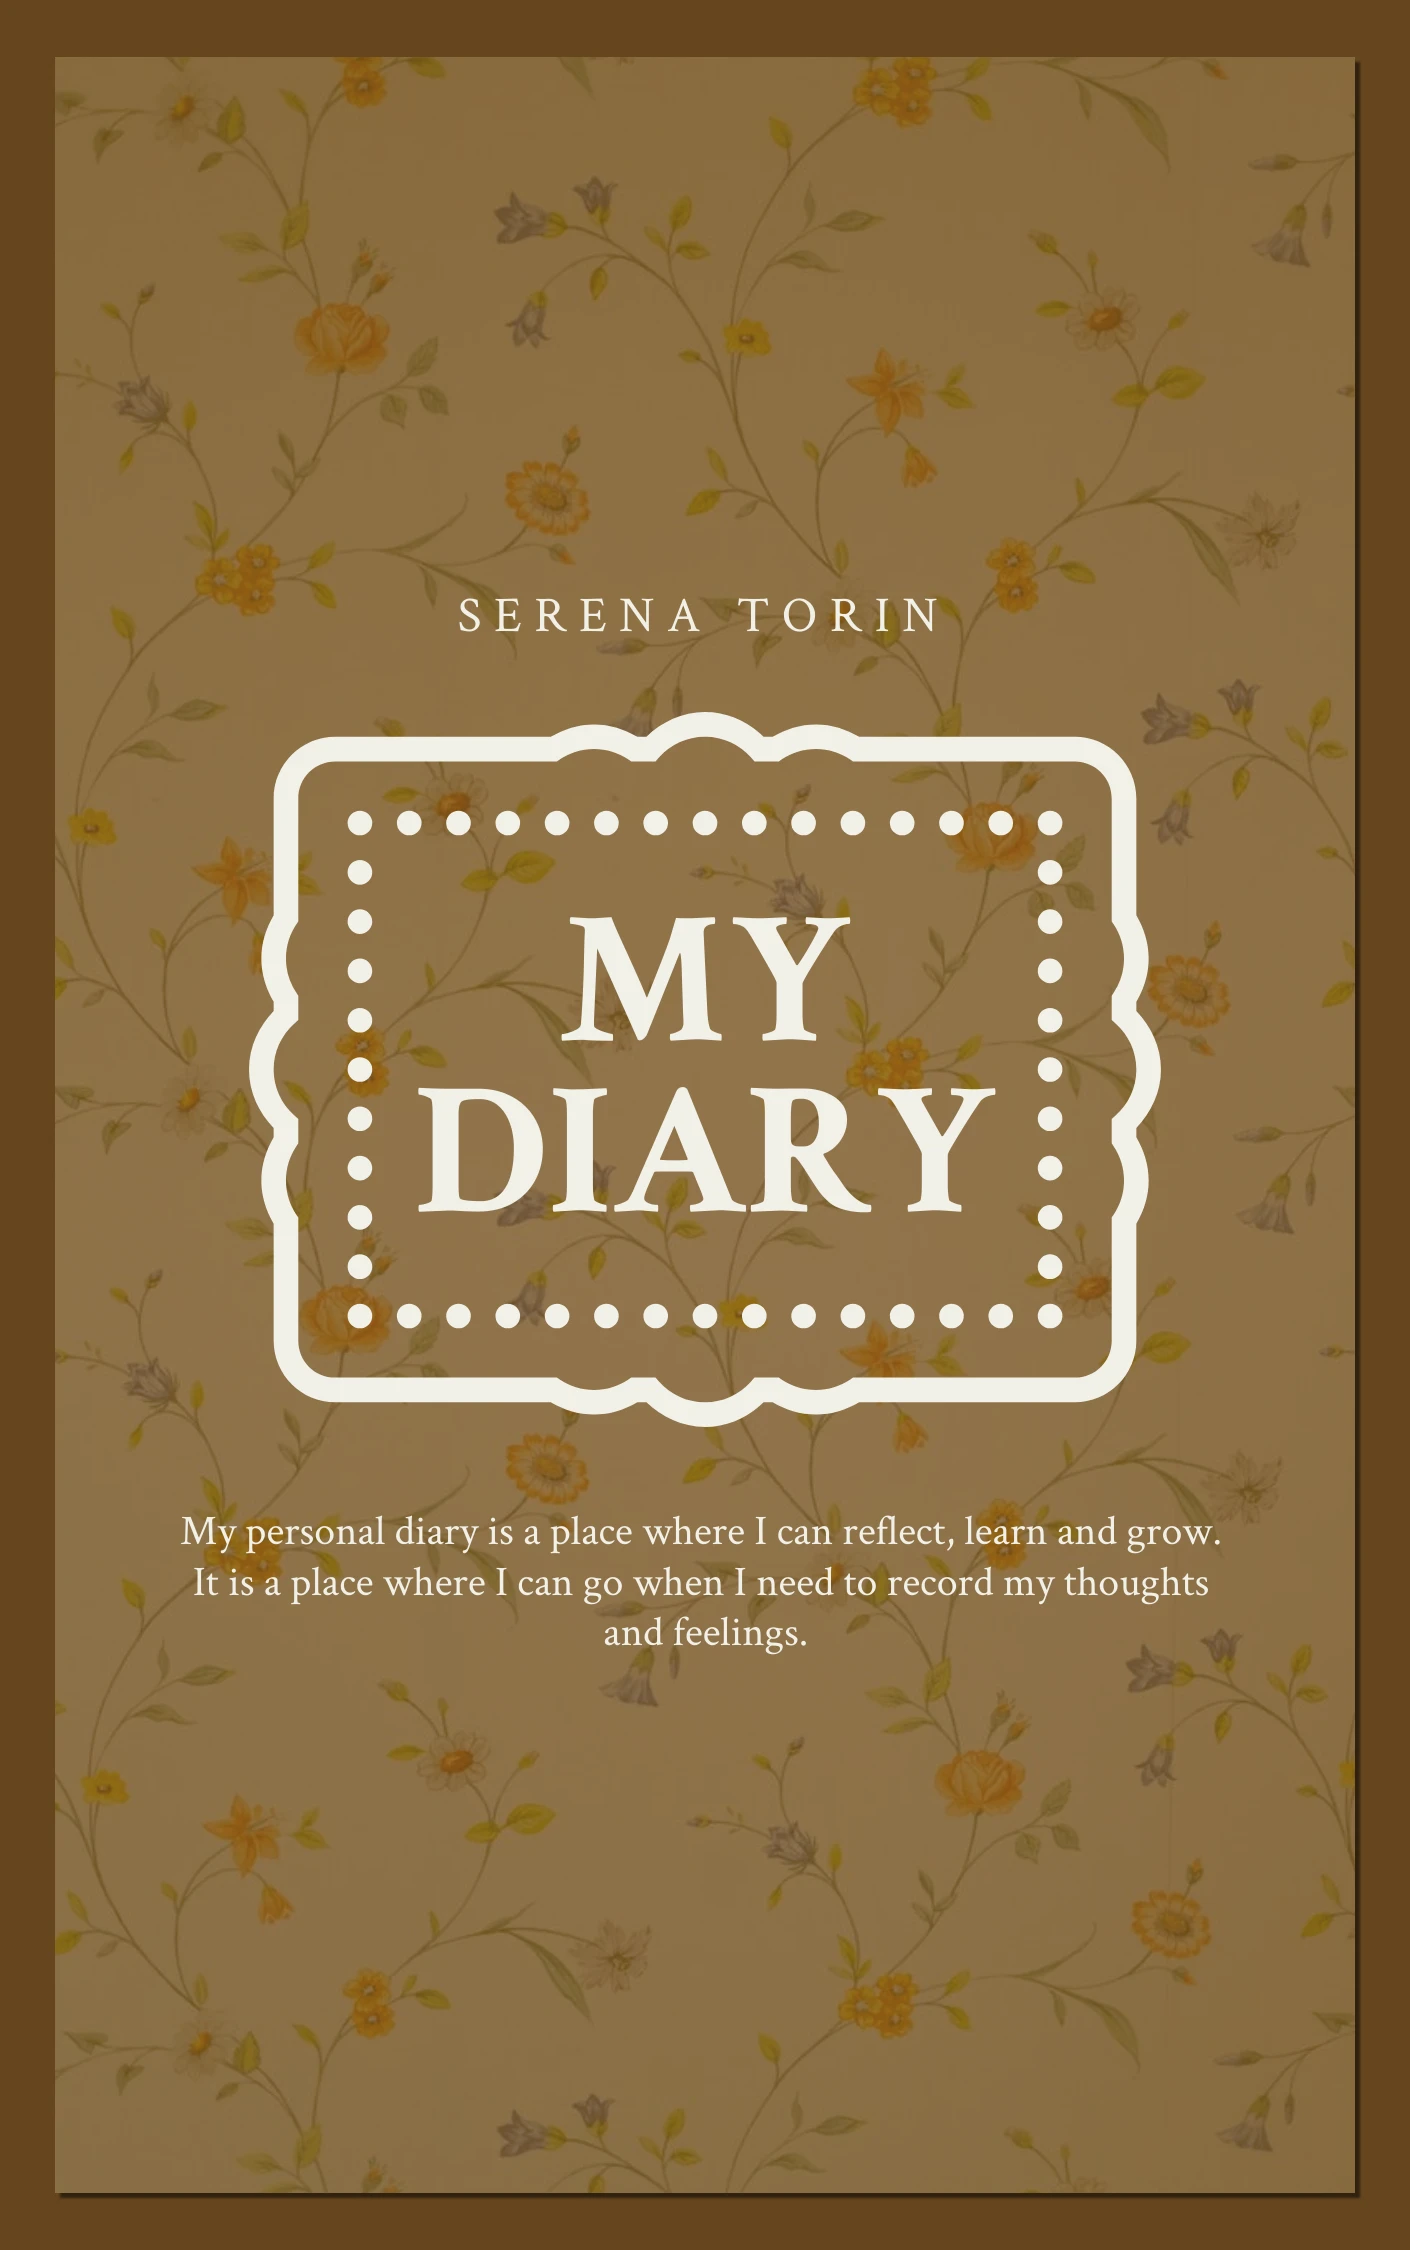 personal diary cover design